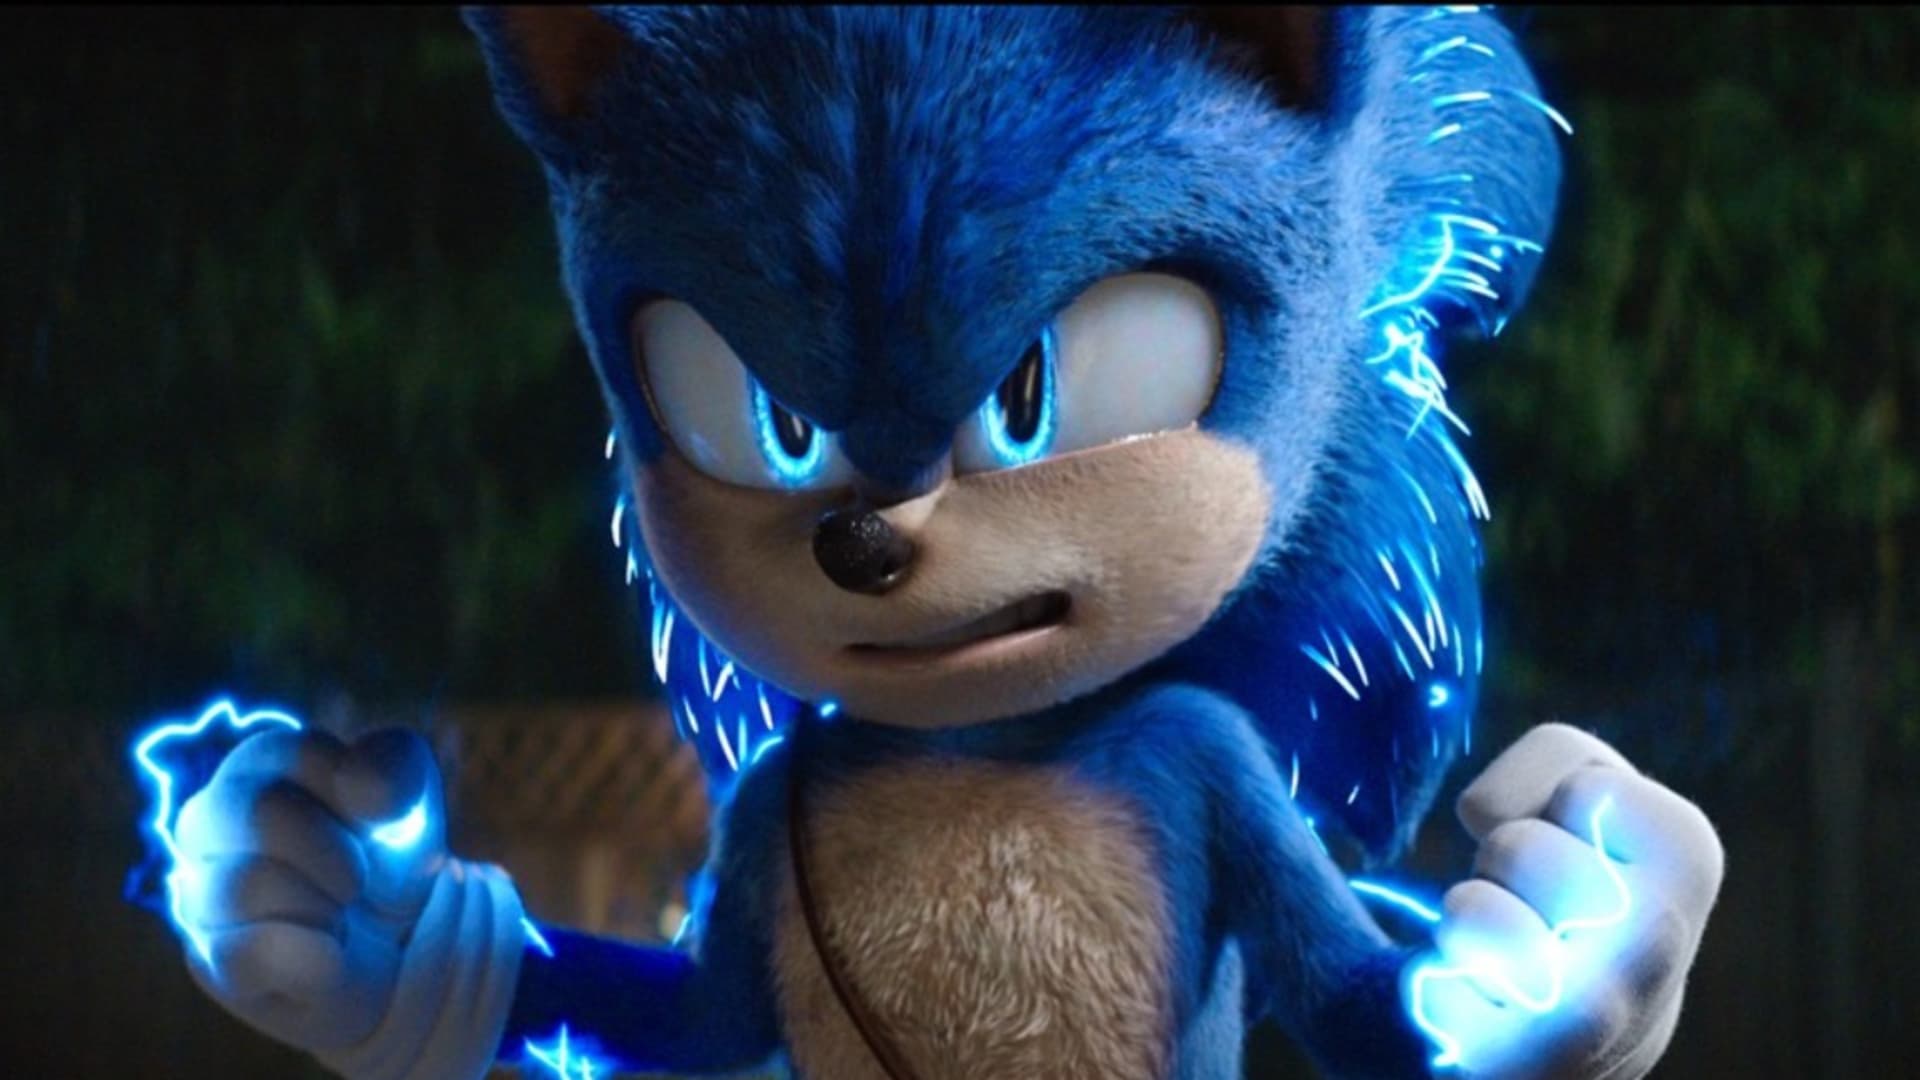 Sonic the Hedgehog 2 (2022) - Title Announcement - Paramount